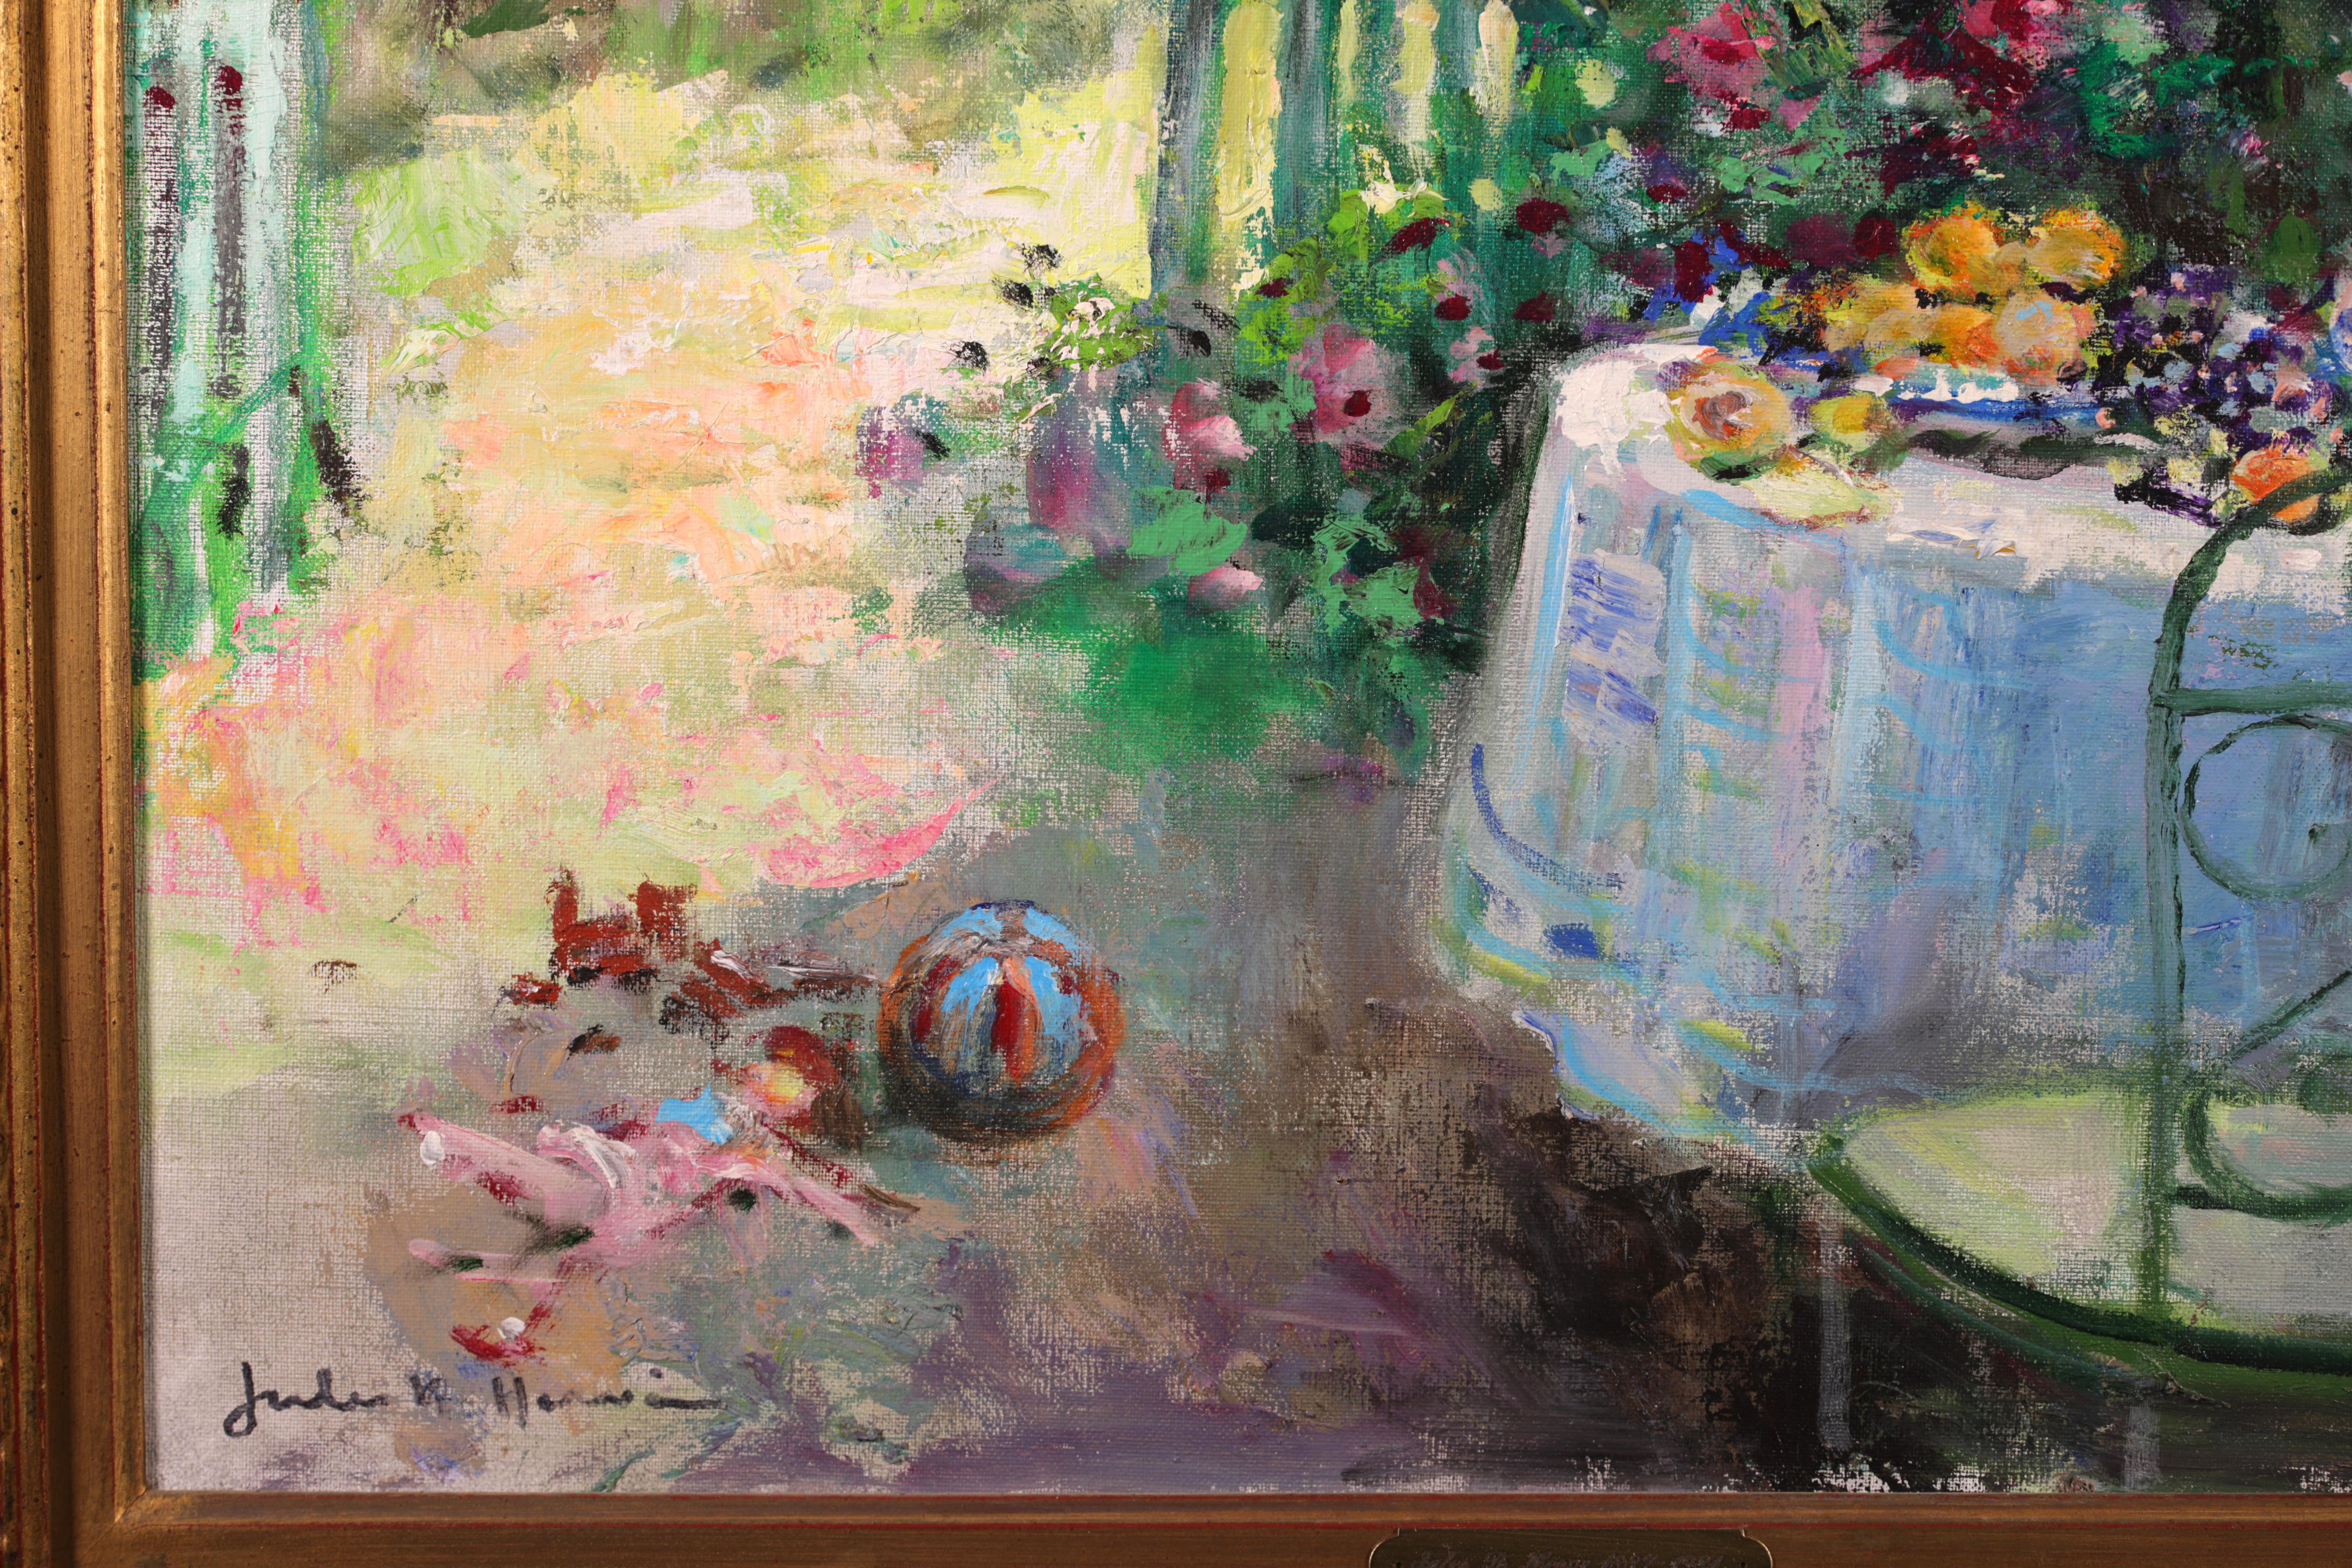 Signed impressionist oil on canvas garden landscape circa 1950 by sought after French painter Jules Rene Herve. This beautiful and large piece depicts a garden scene on a summer's day. A jug and plates of fruit are laid upon a table which sits in